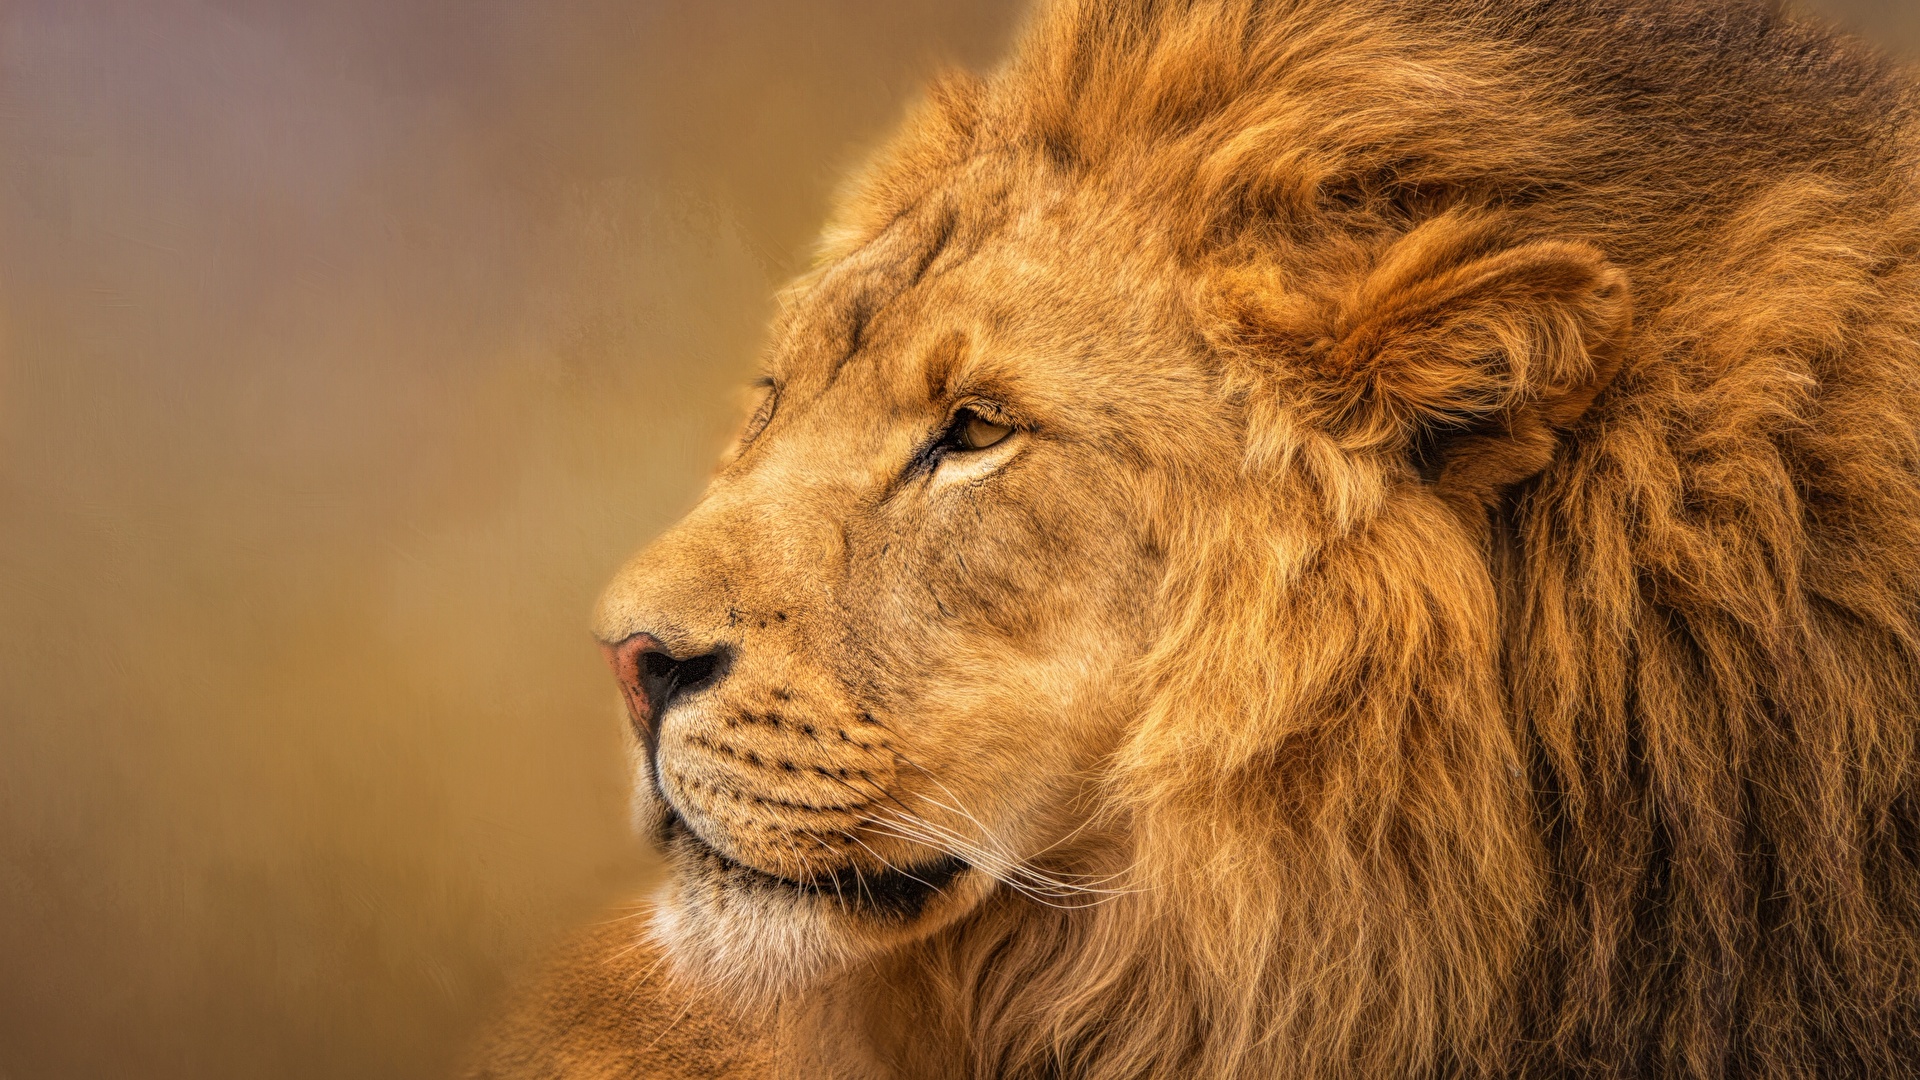 lion hd wallpapers 1920x1080